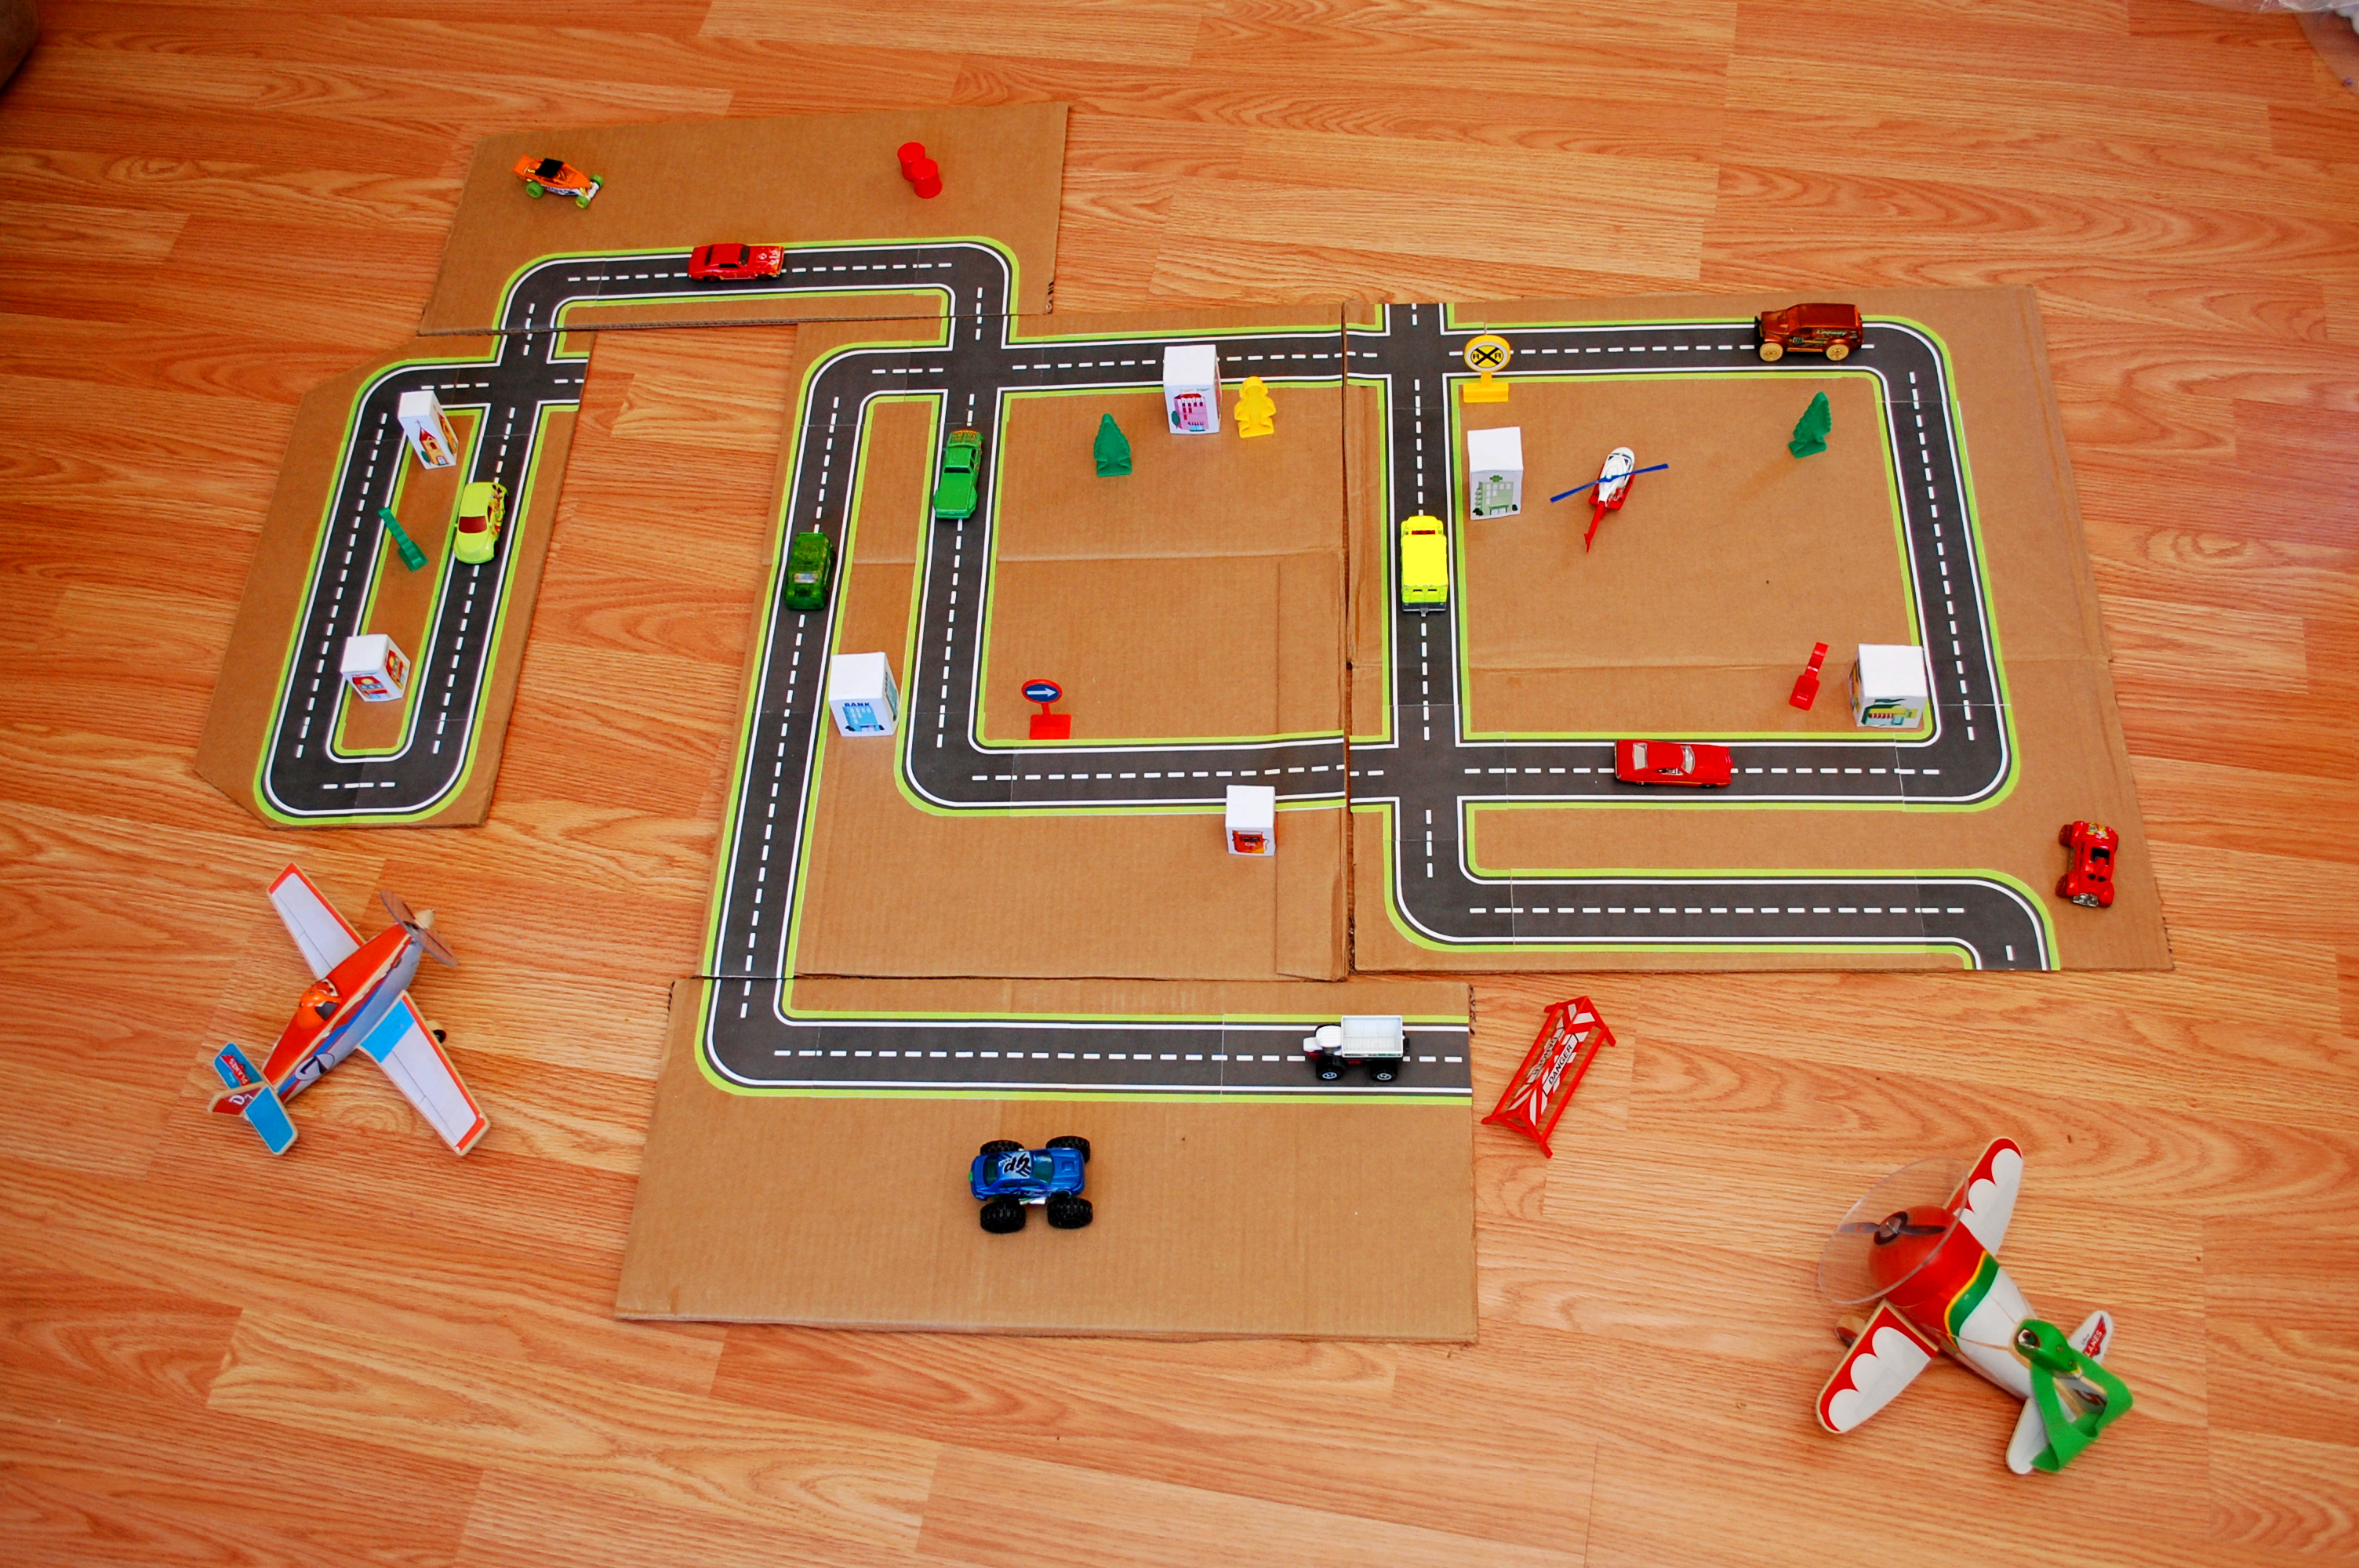 10 Best Images of Printable Road For Cars Free Printable Roads, Toy